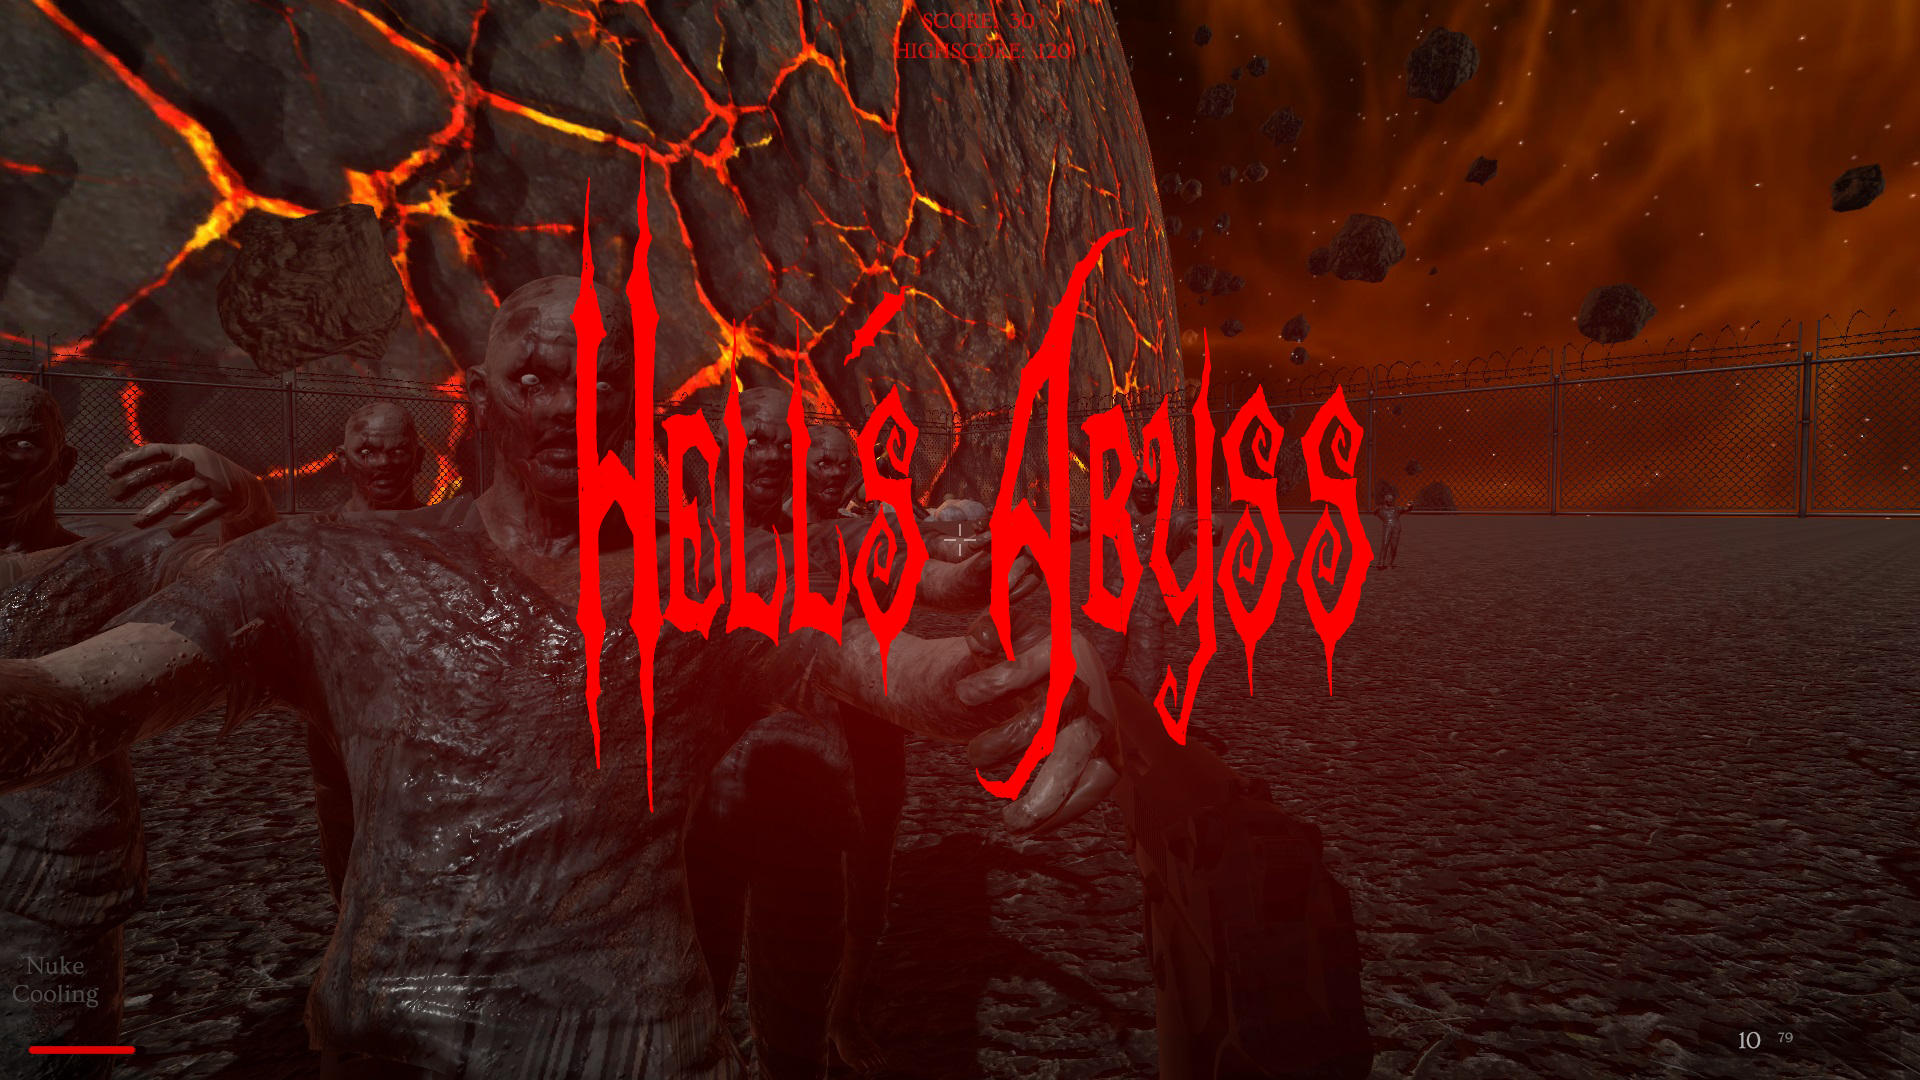 Hell's Abyss